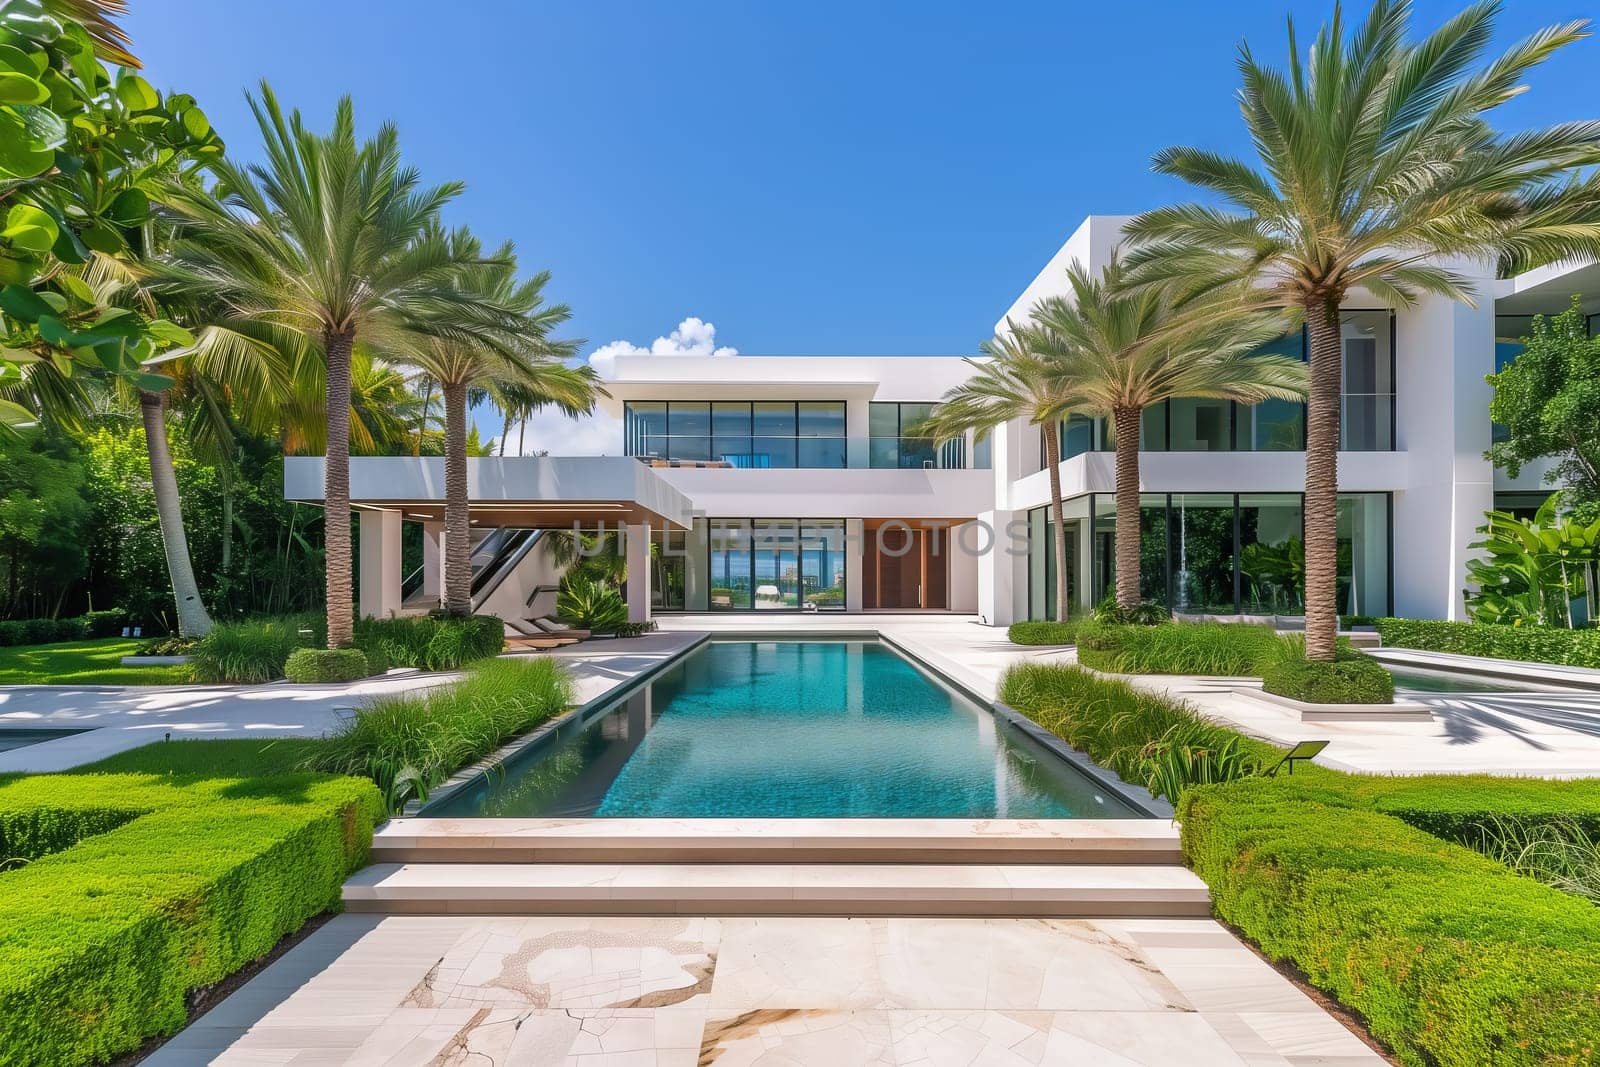 A beautiful white house with a swimming pool in the front surrounded by palm trees, creating a serene oasis against the blue sky